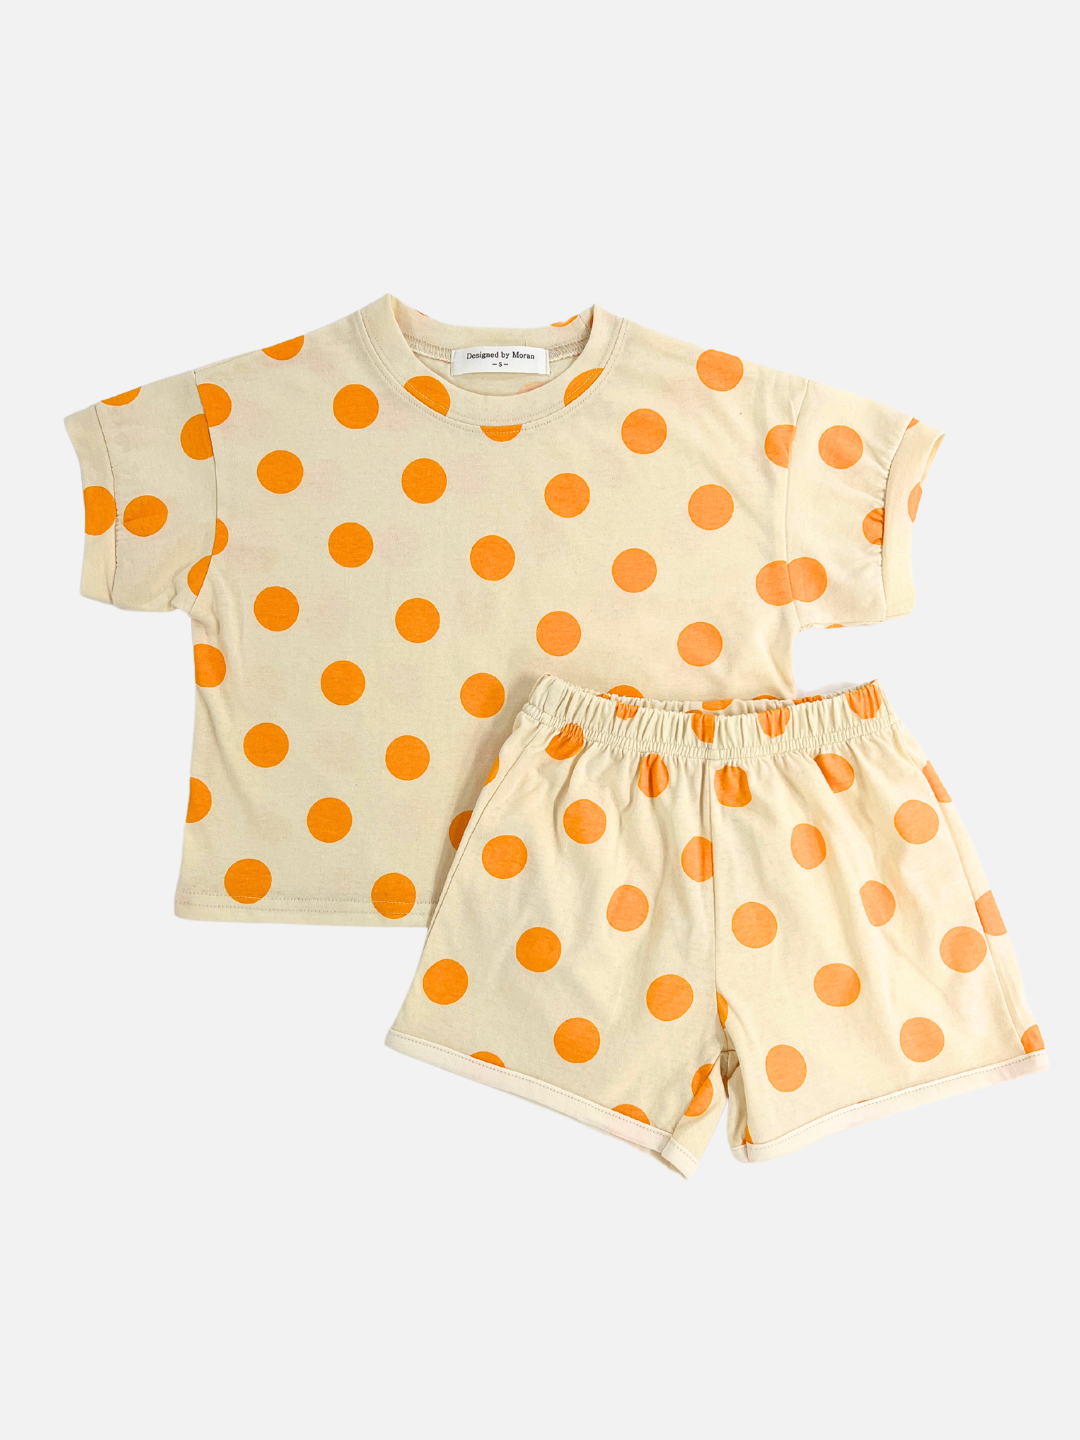 A kids' tee shirt and shorts set in a pattern of orange dots on an ecru background